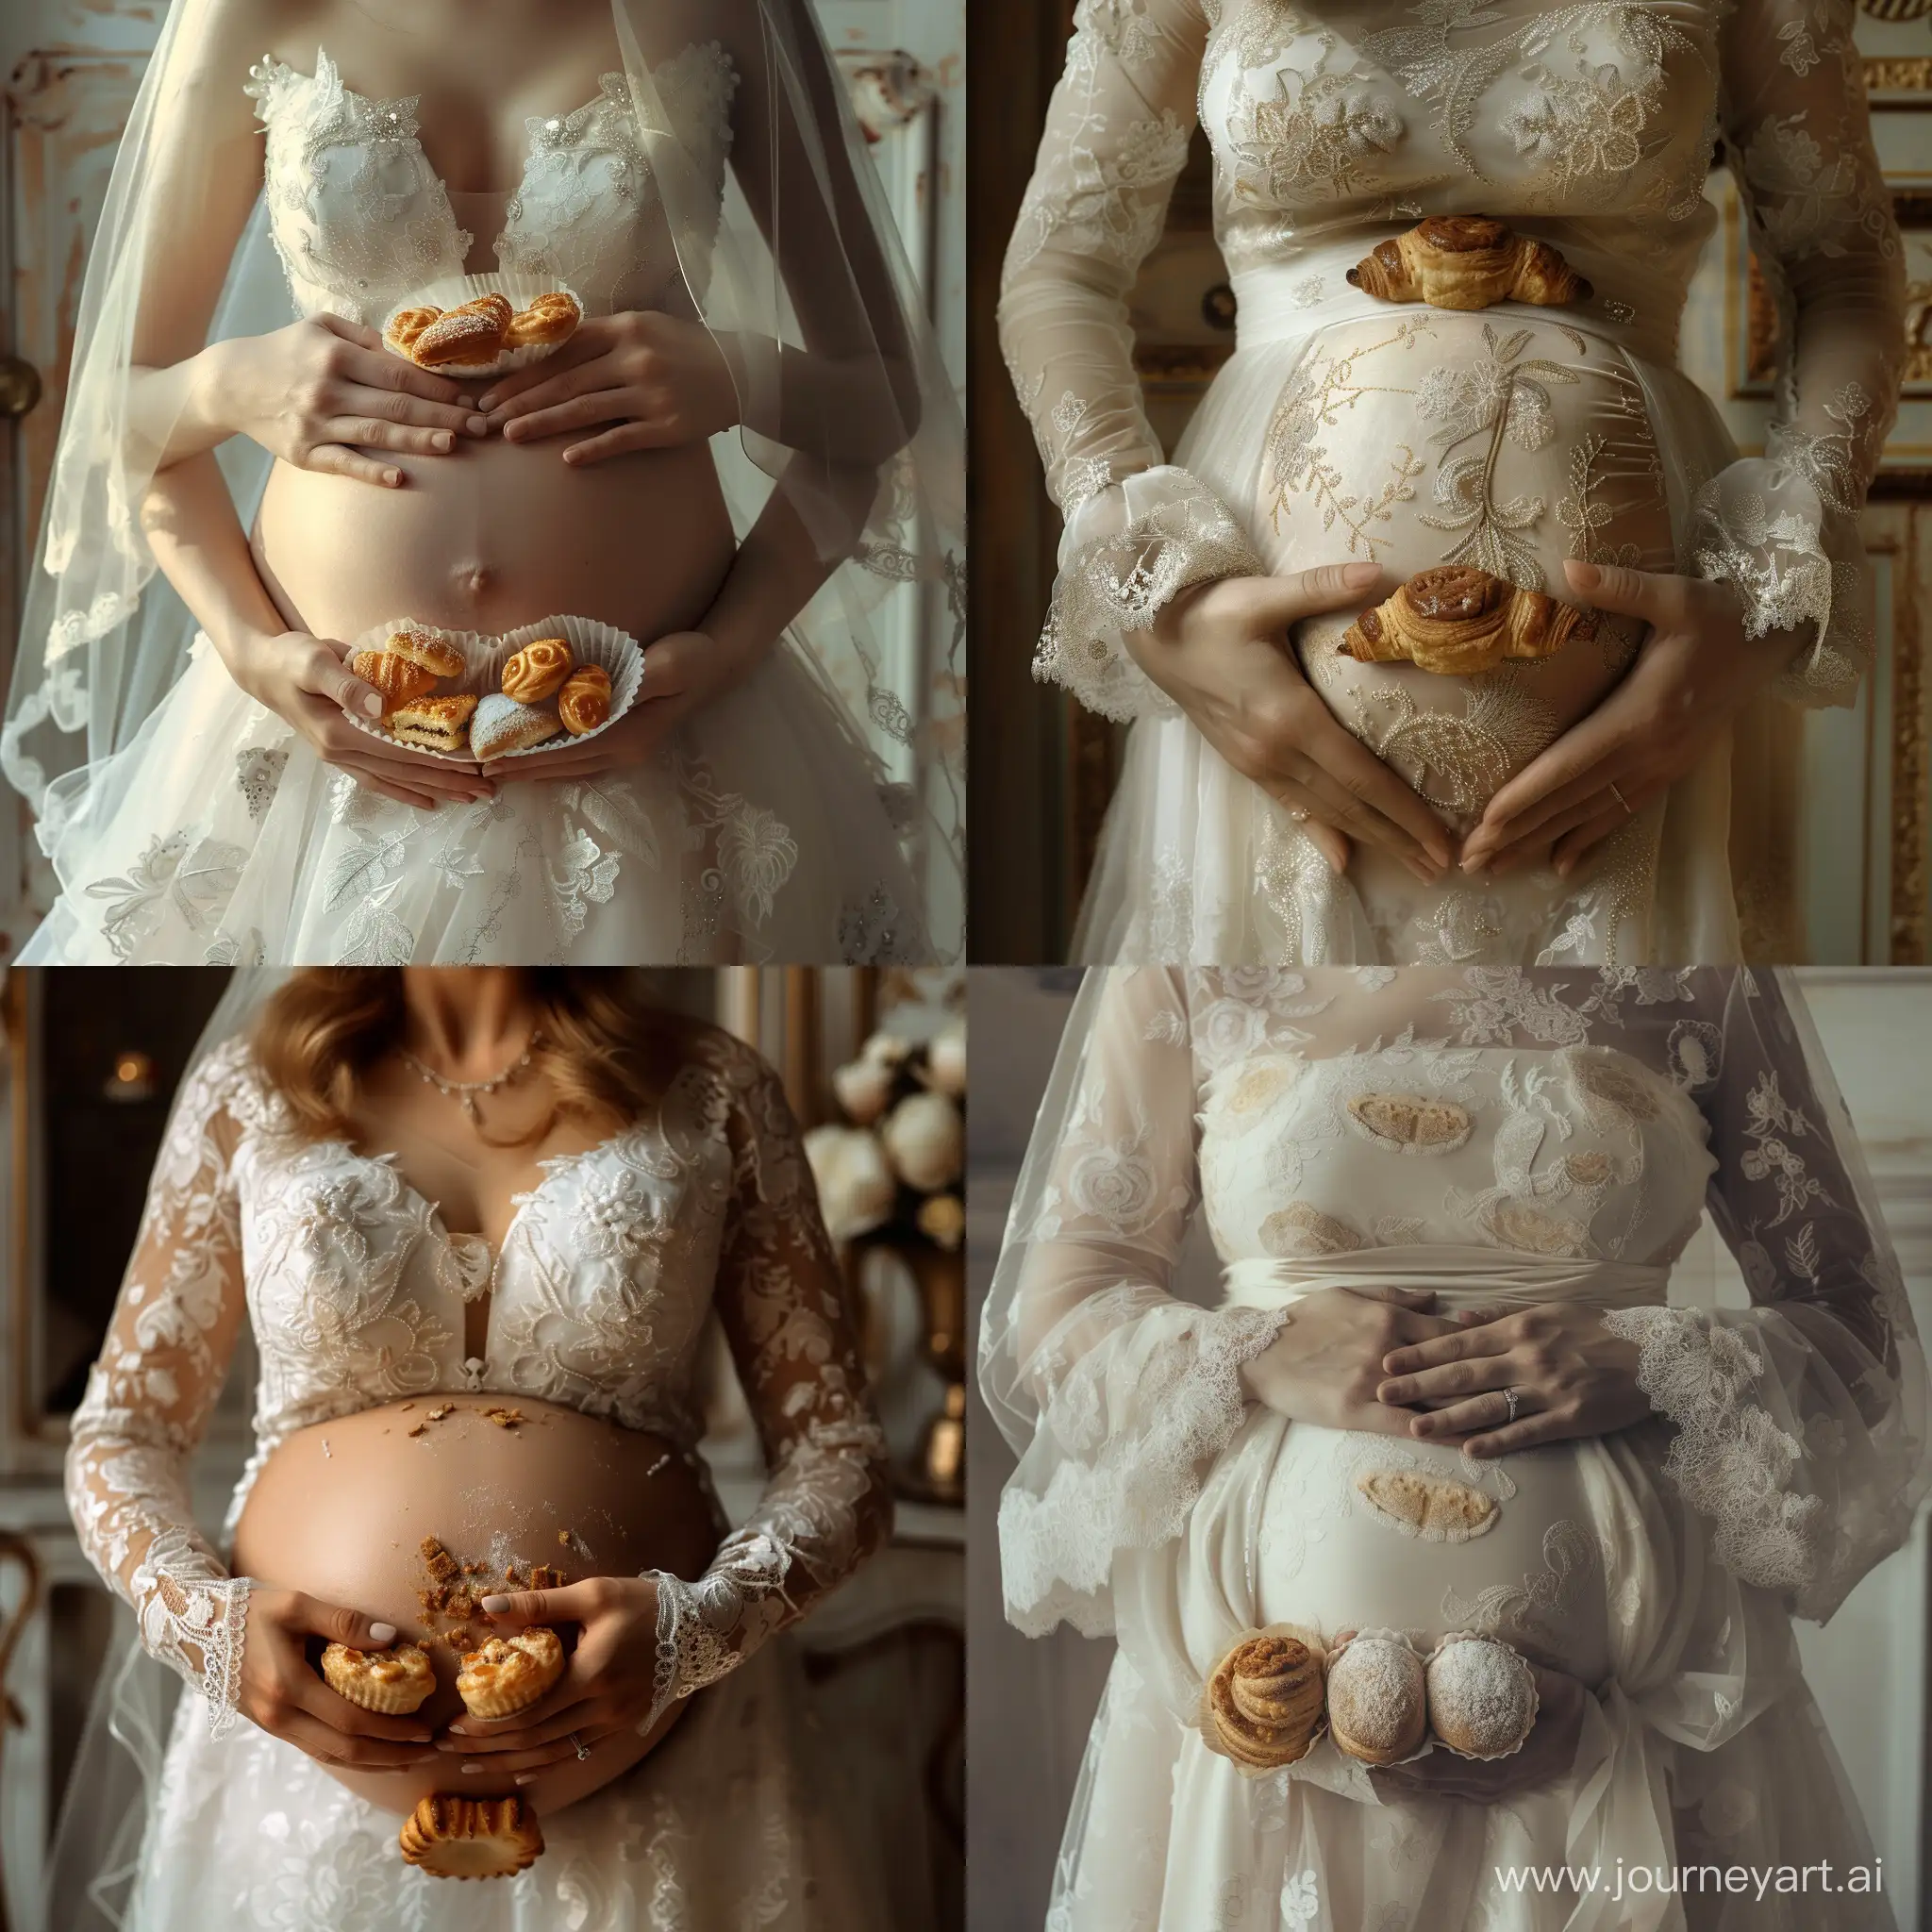 Pregnant-Bride-Holding-Pastries-in-4K-Ultra-HD-Realism